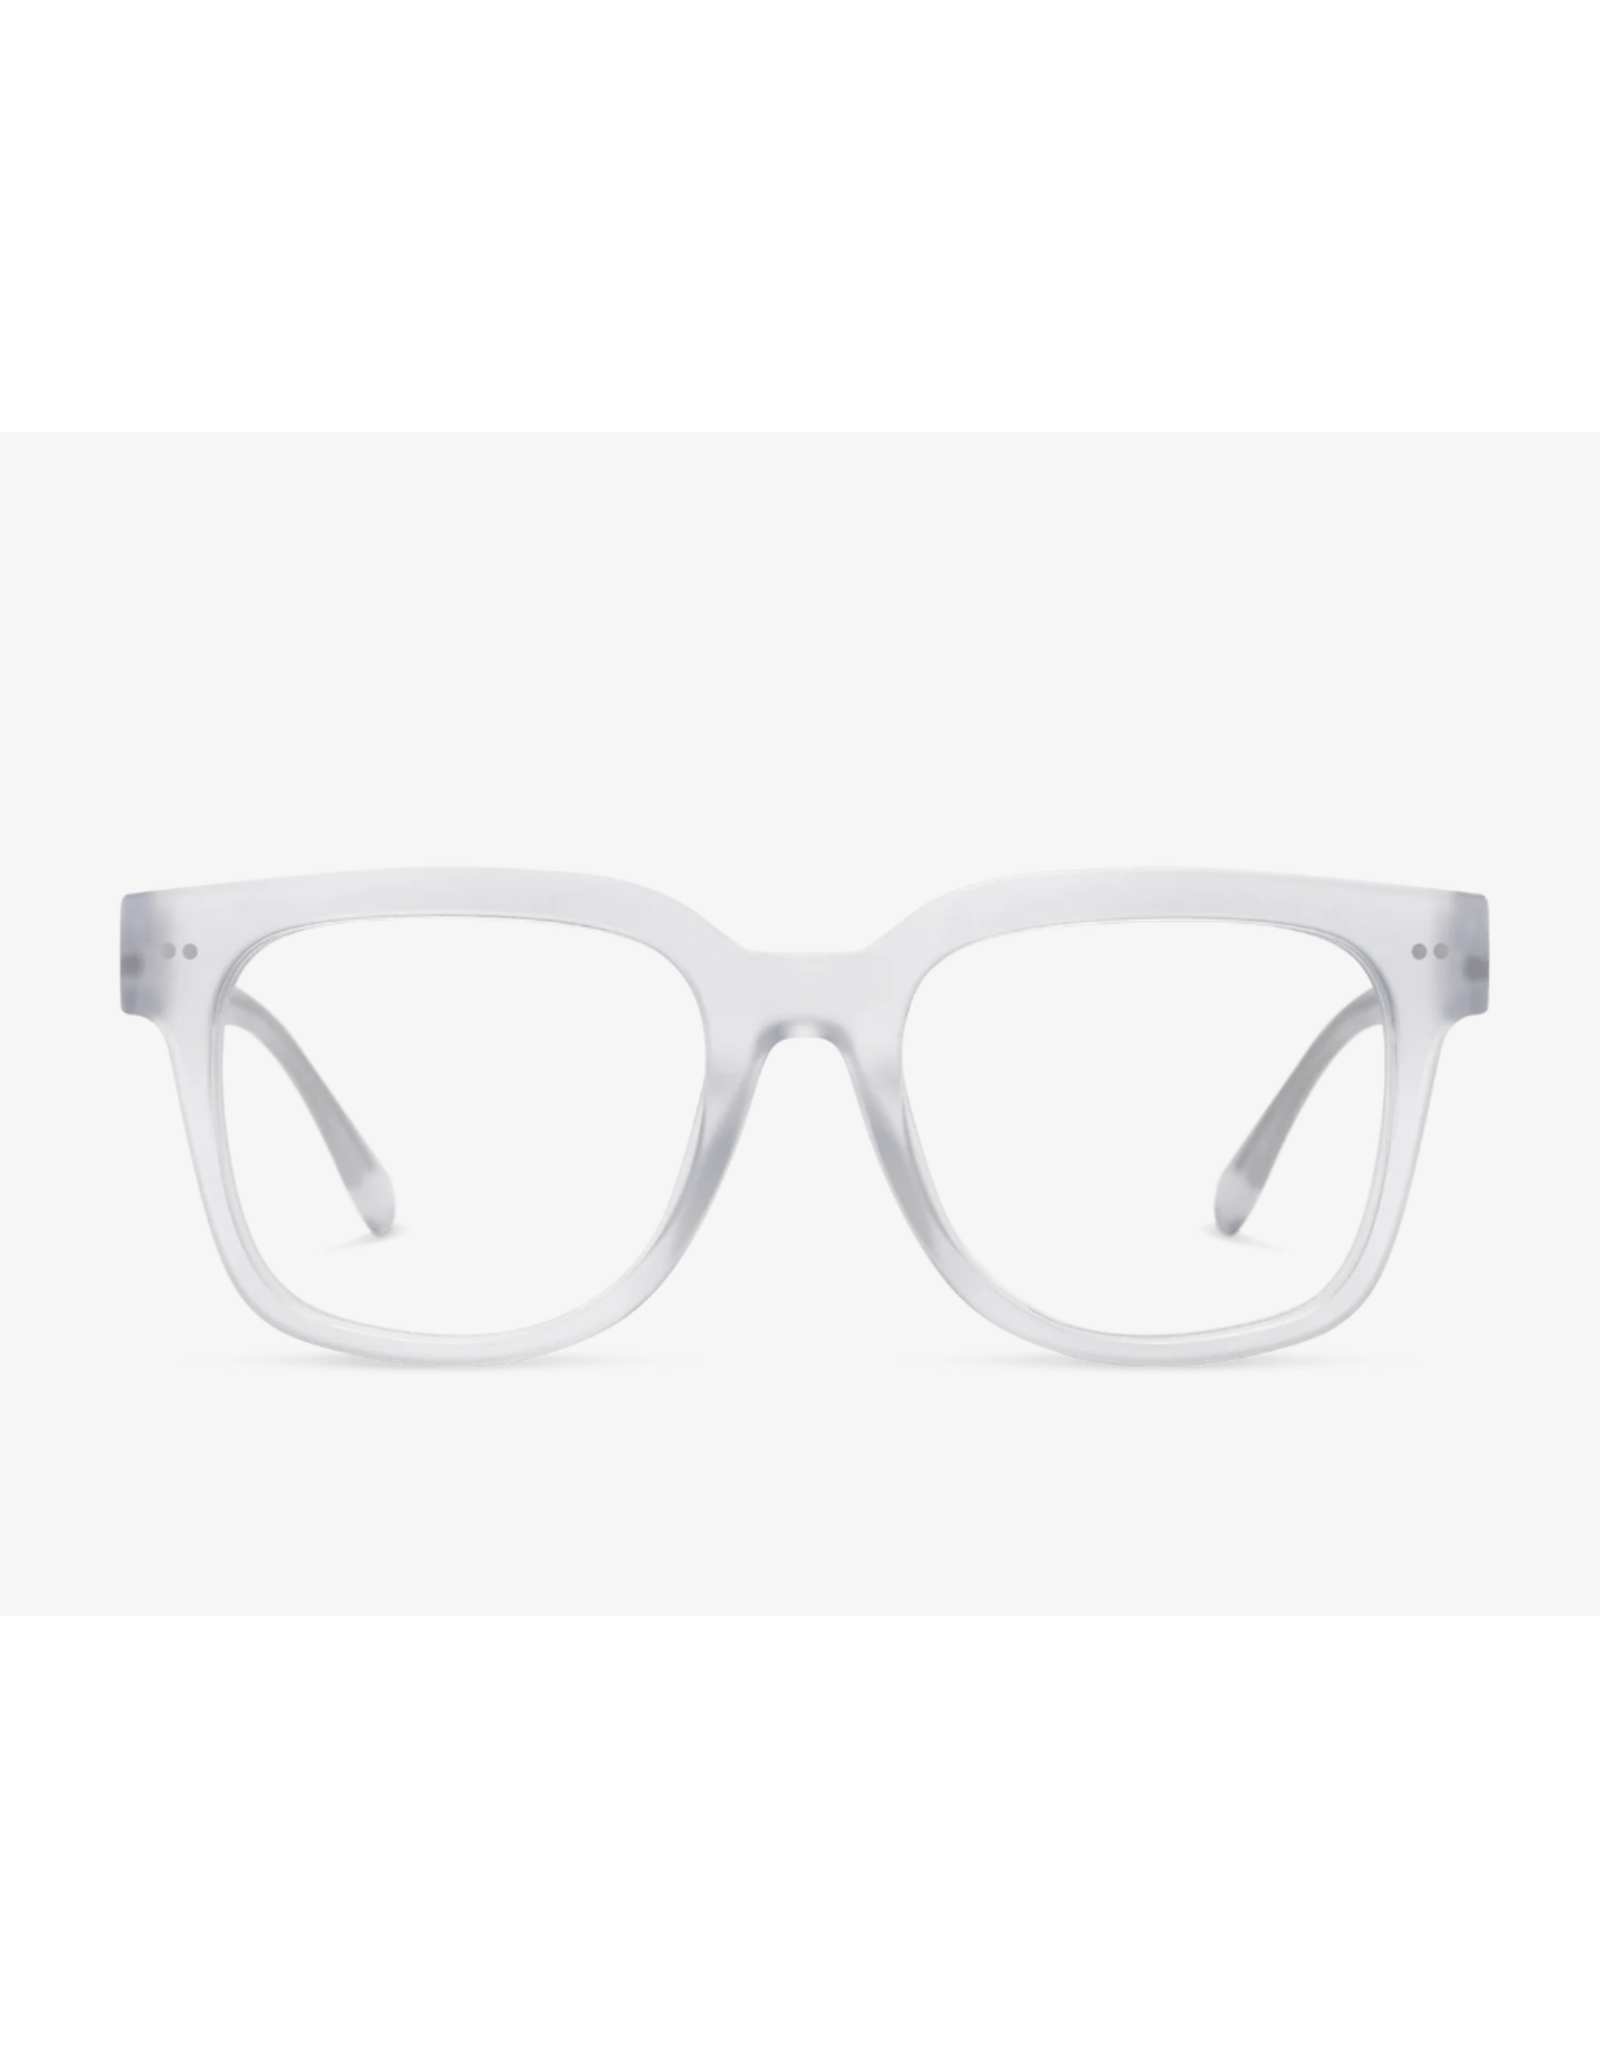 LOOK Laurel Readers in Clear, 1.5 Magnification